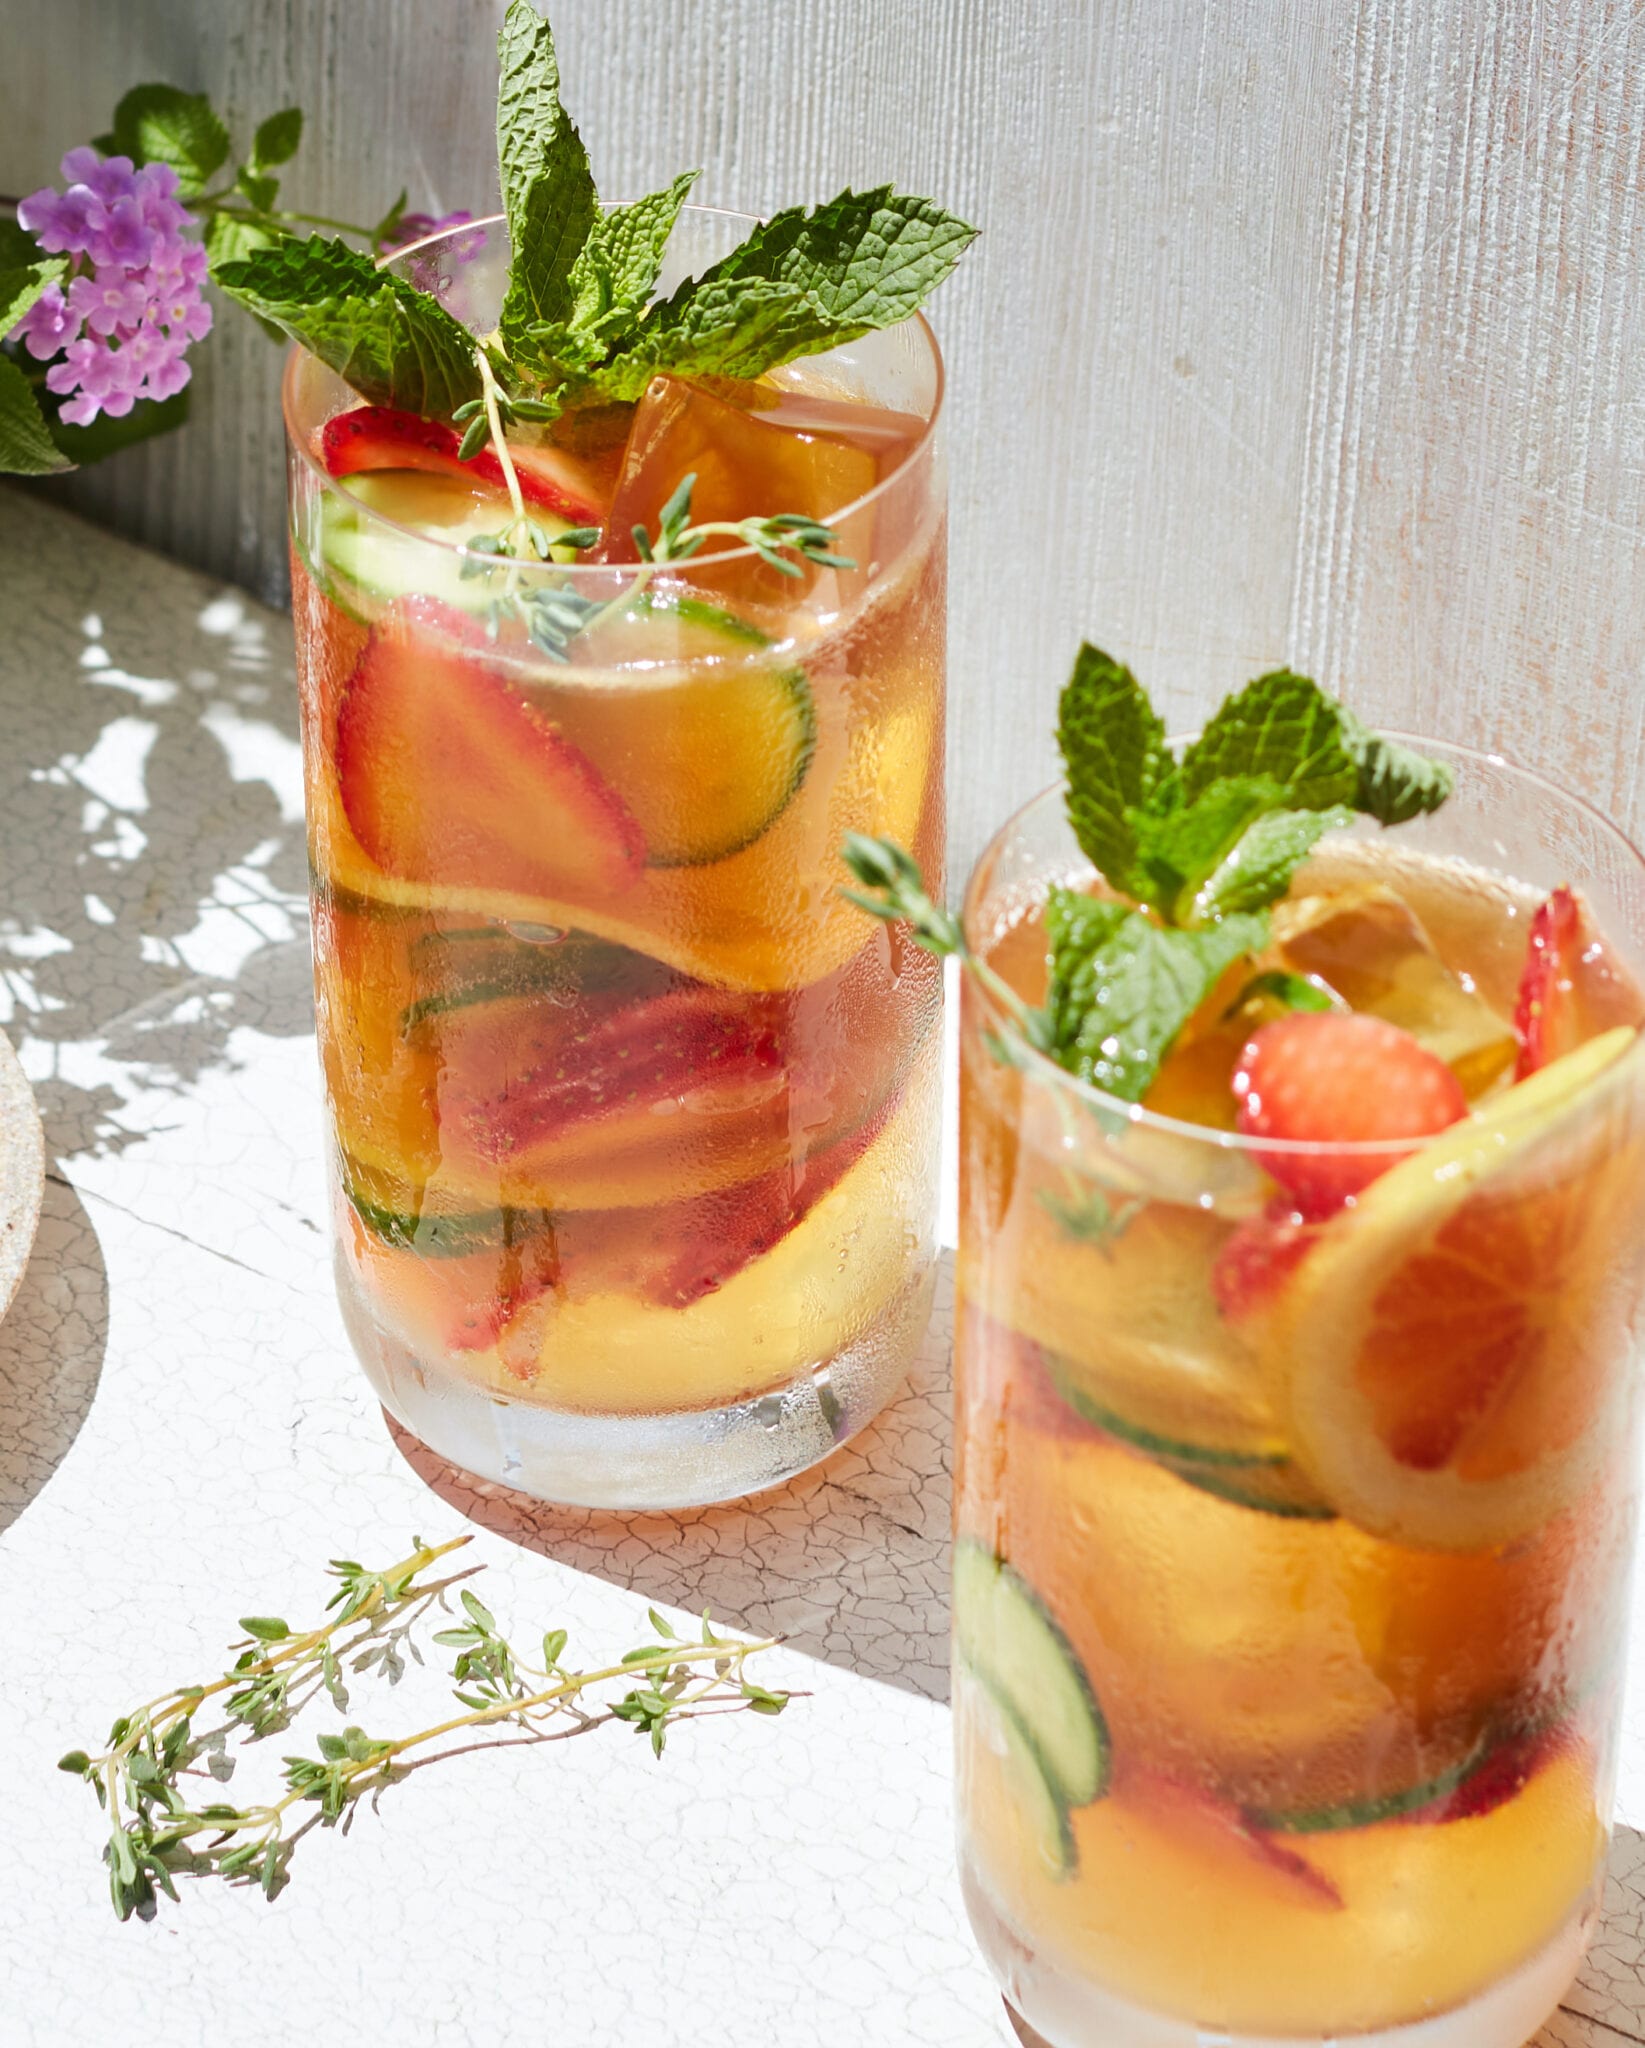 Classic Pimm’s Cup